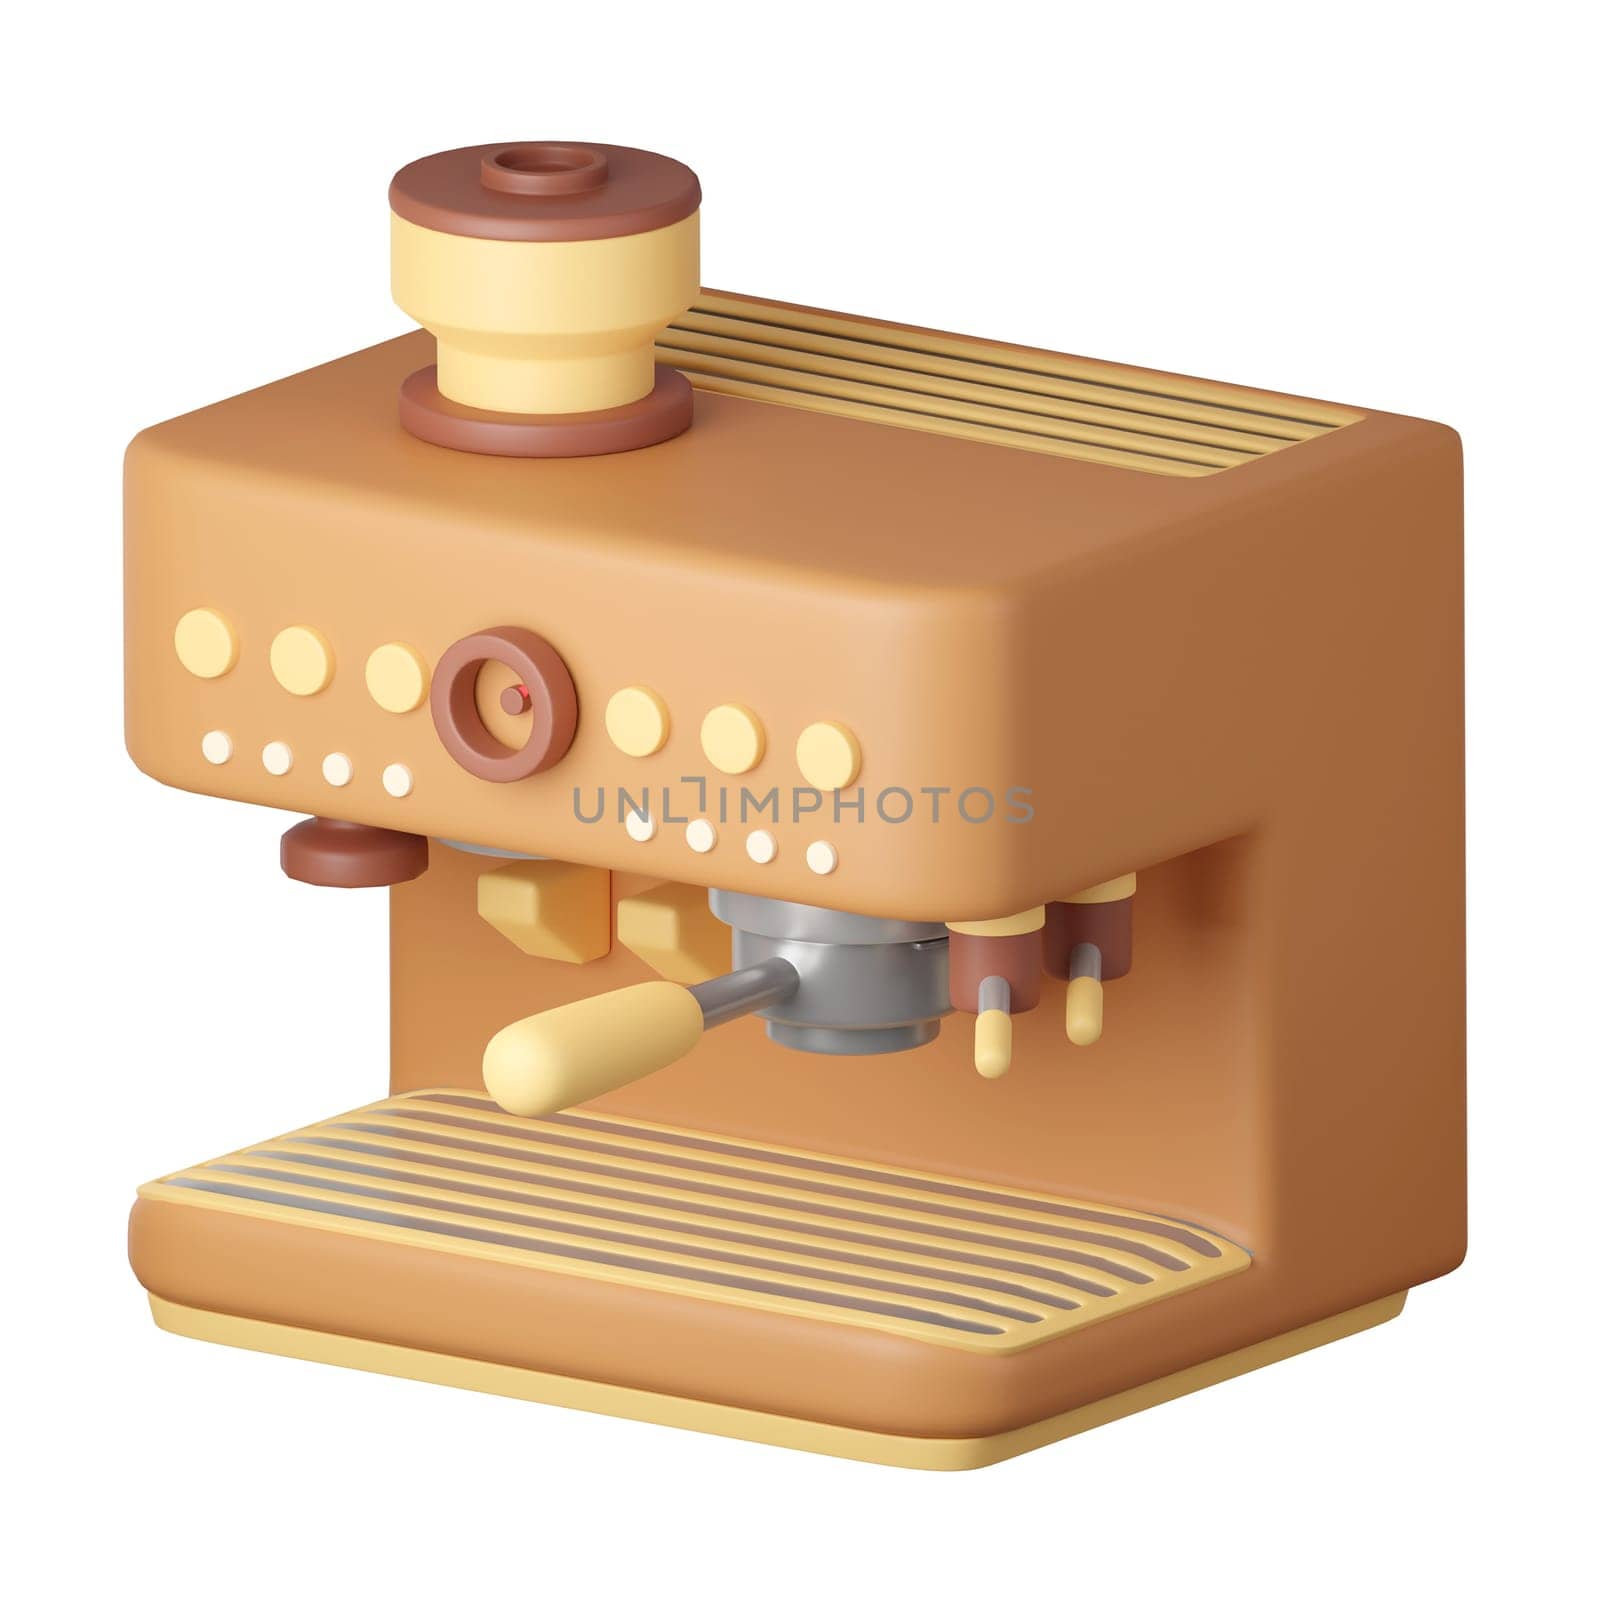 Coffee Machine Cartoon Style Isolated on a White Background. 3d illustration.